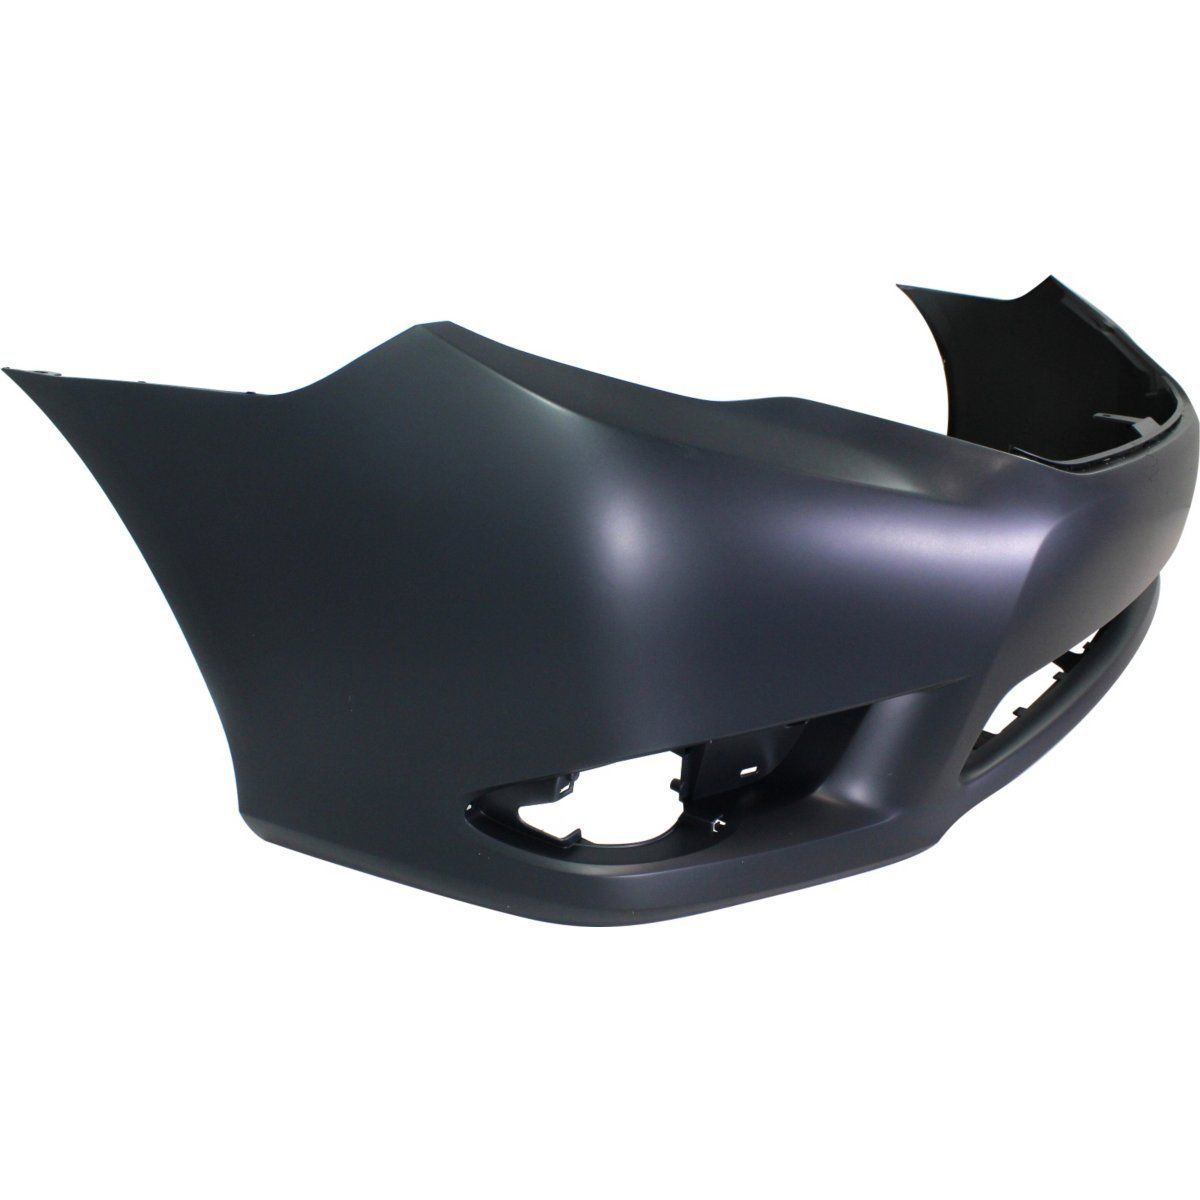 2011-2012 TOYOTA AVALON Front Bumper Cover all Painted to Match